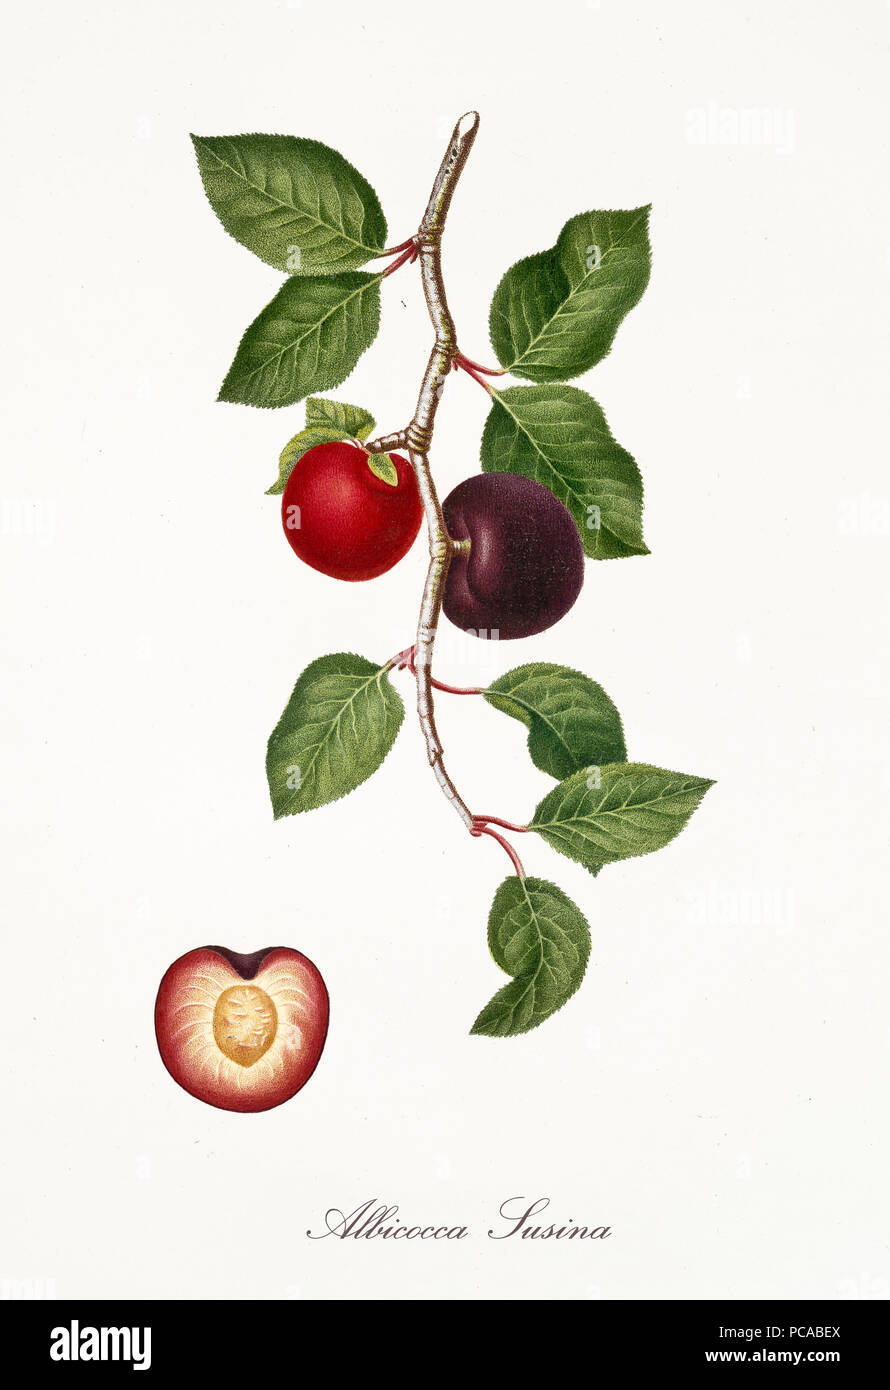 Red Apricot, known also as plum apricot, apricot tree leaves and fruit section with kernel isolated on white background. Old botanical illustration By Giorgio Gallesio publ. 1817, 1839 Pisa Italy Stock Photo